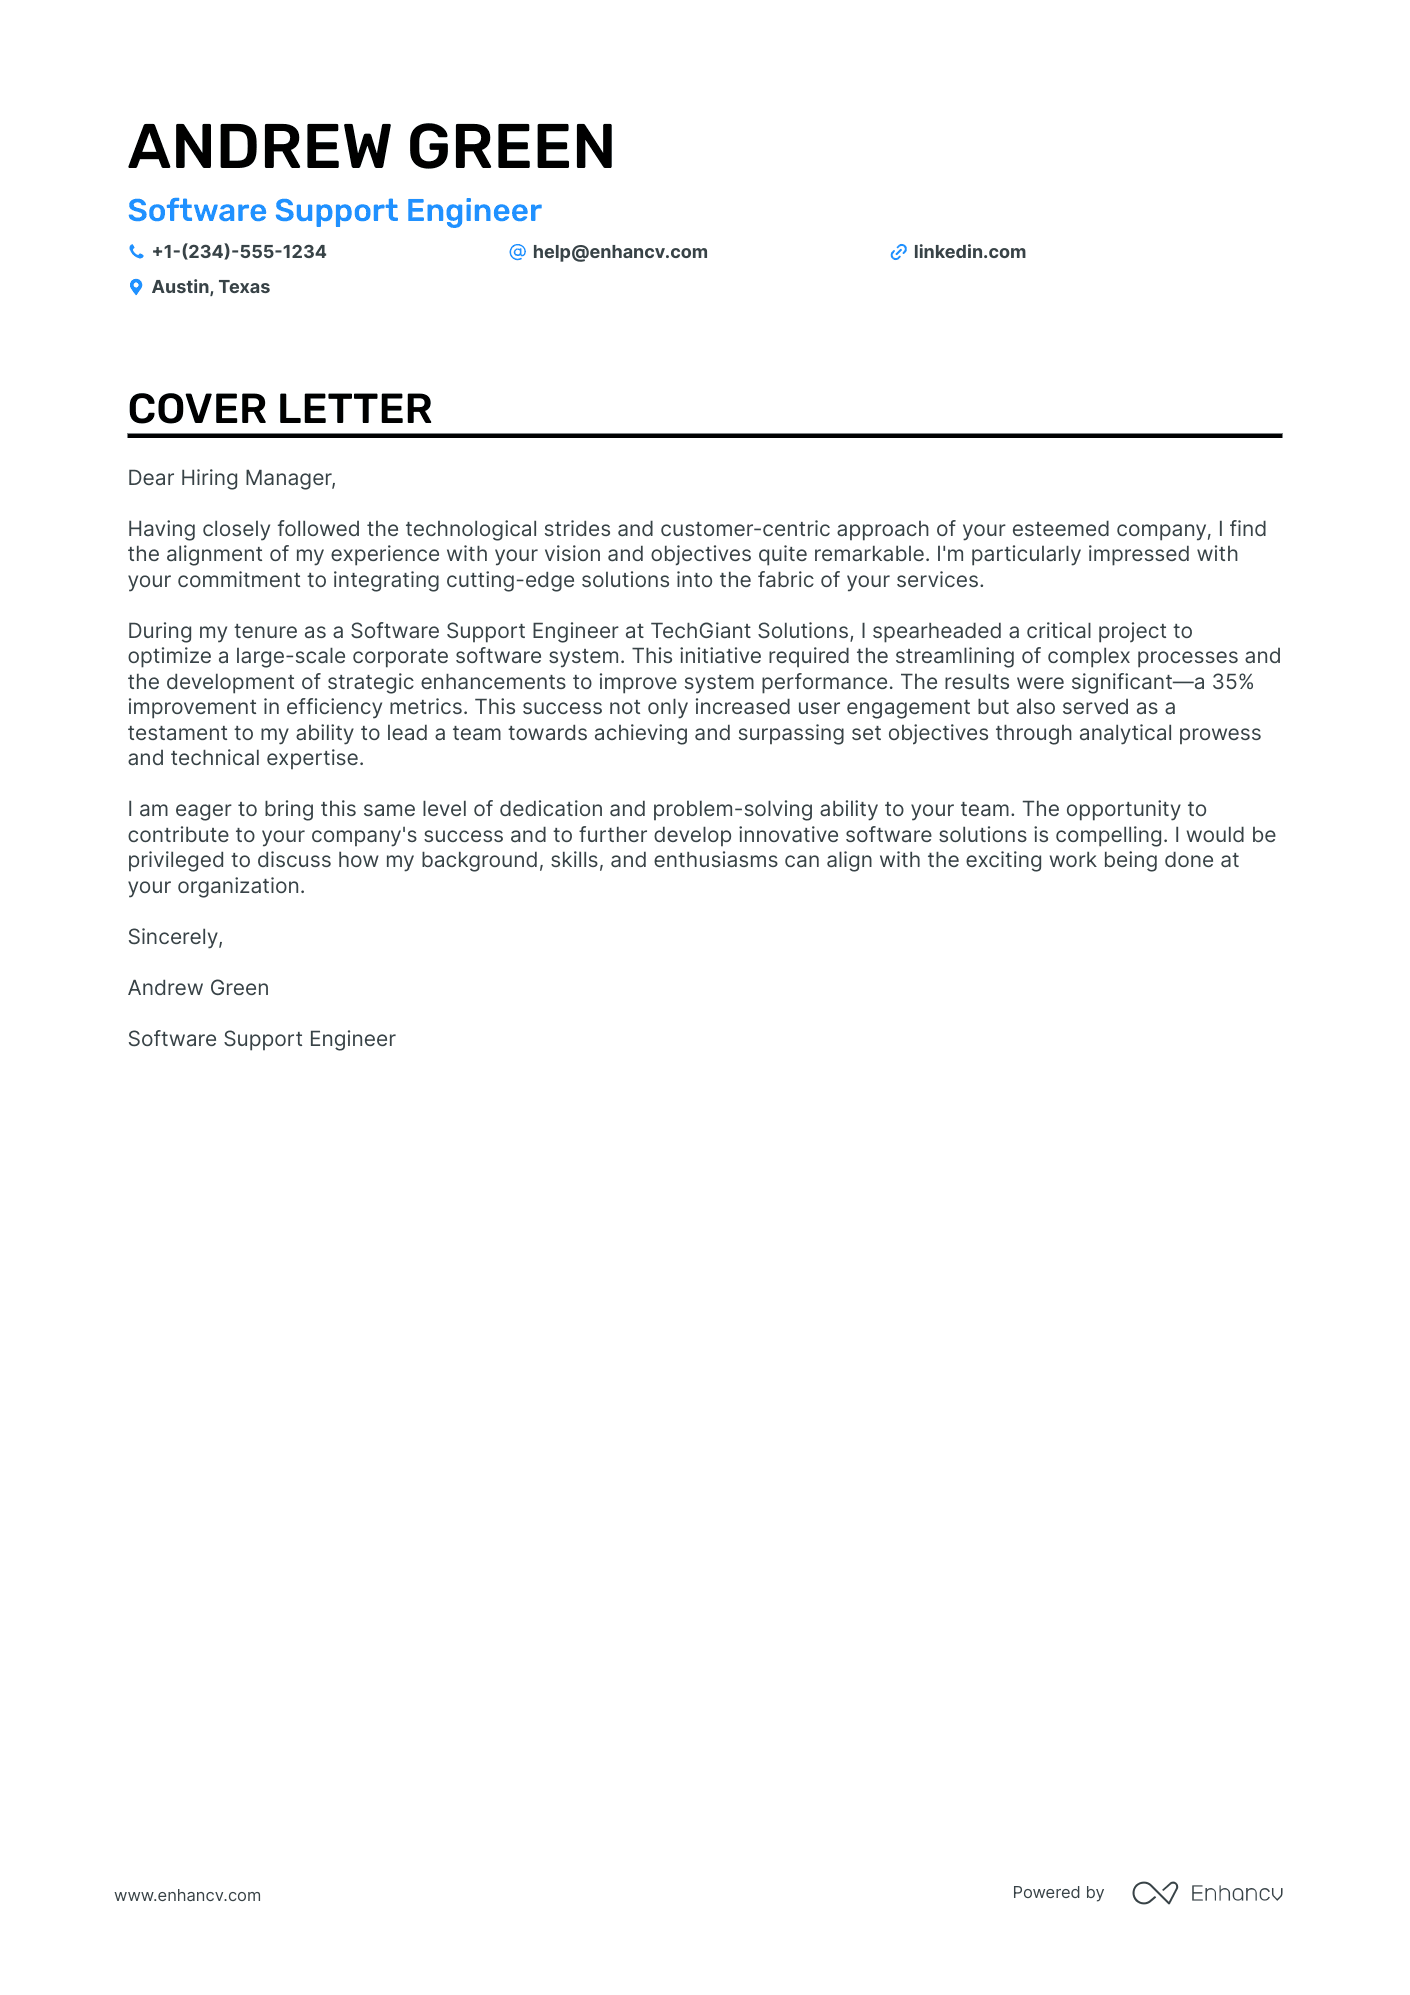 Software Support Engineer cover letter